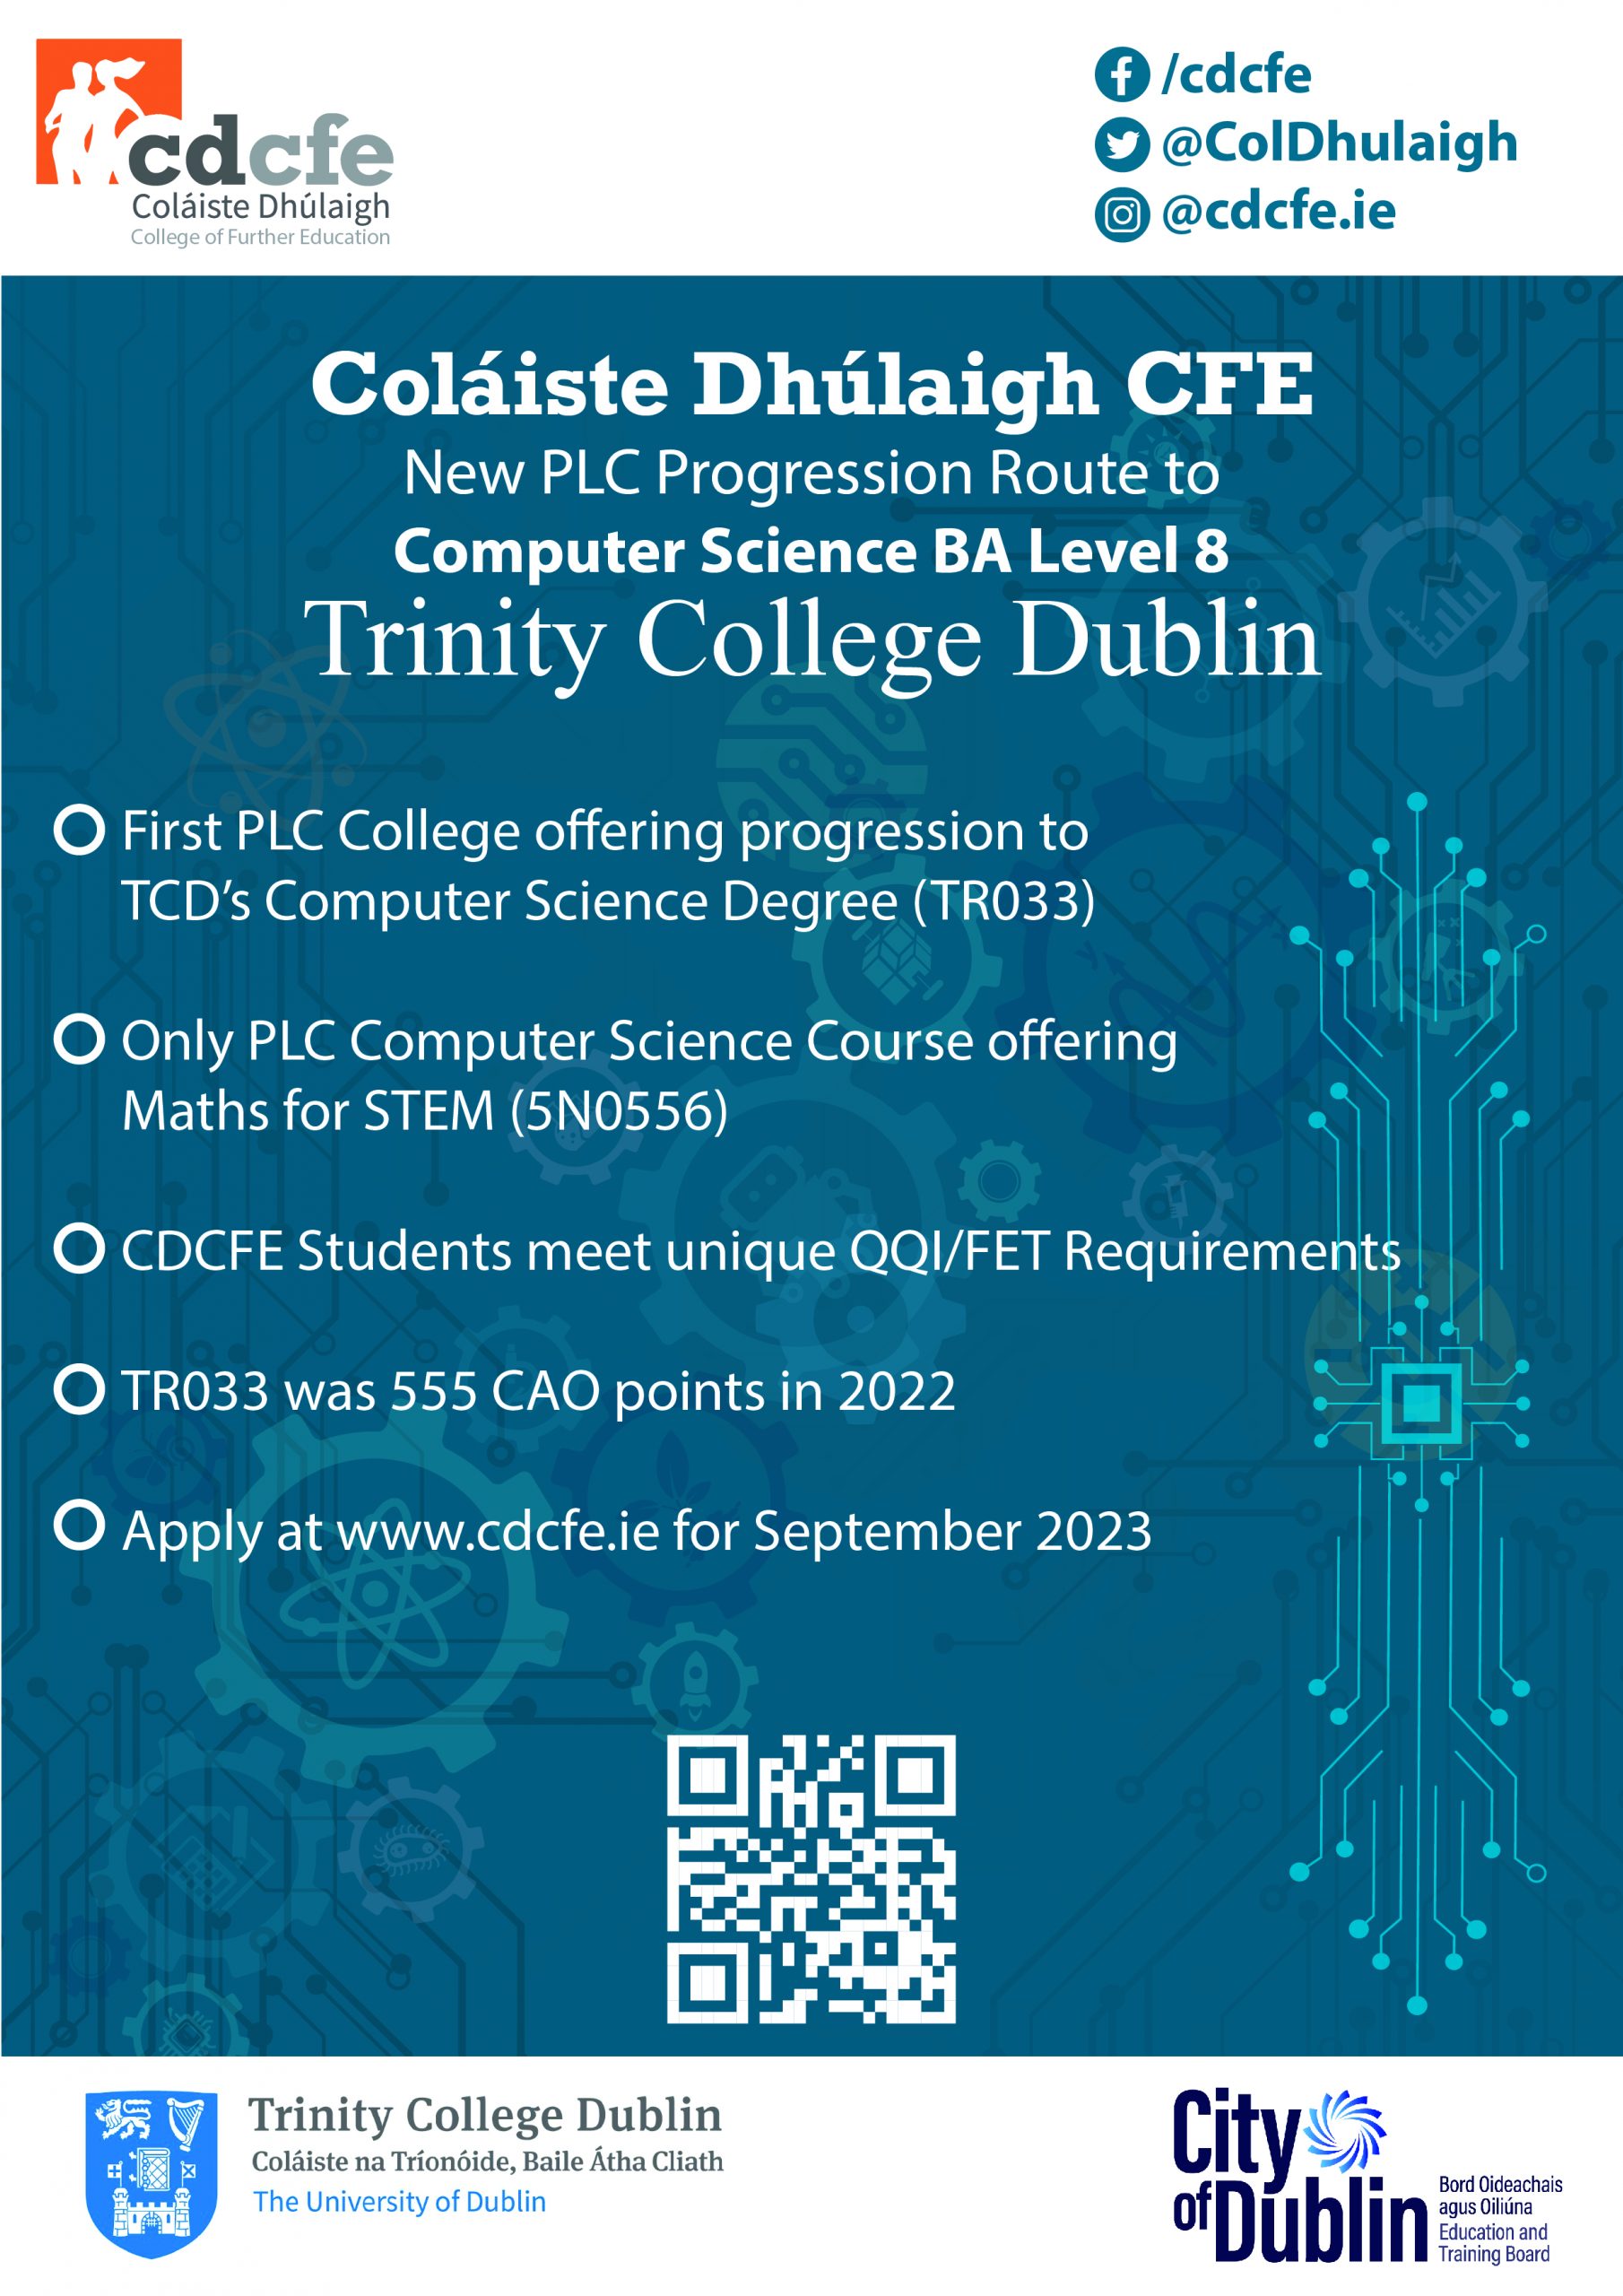 Progression route from CDCFE to Computer Science at TCD